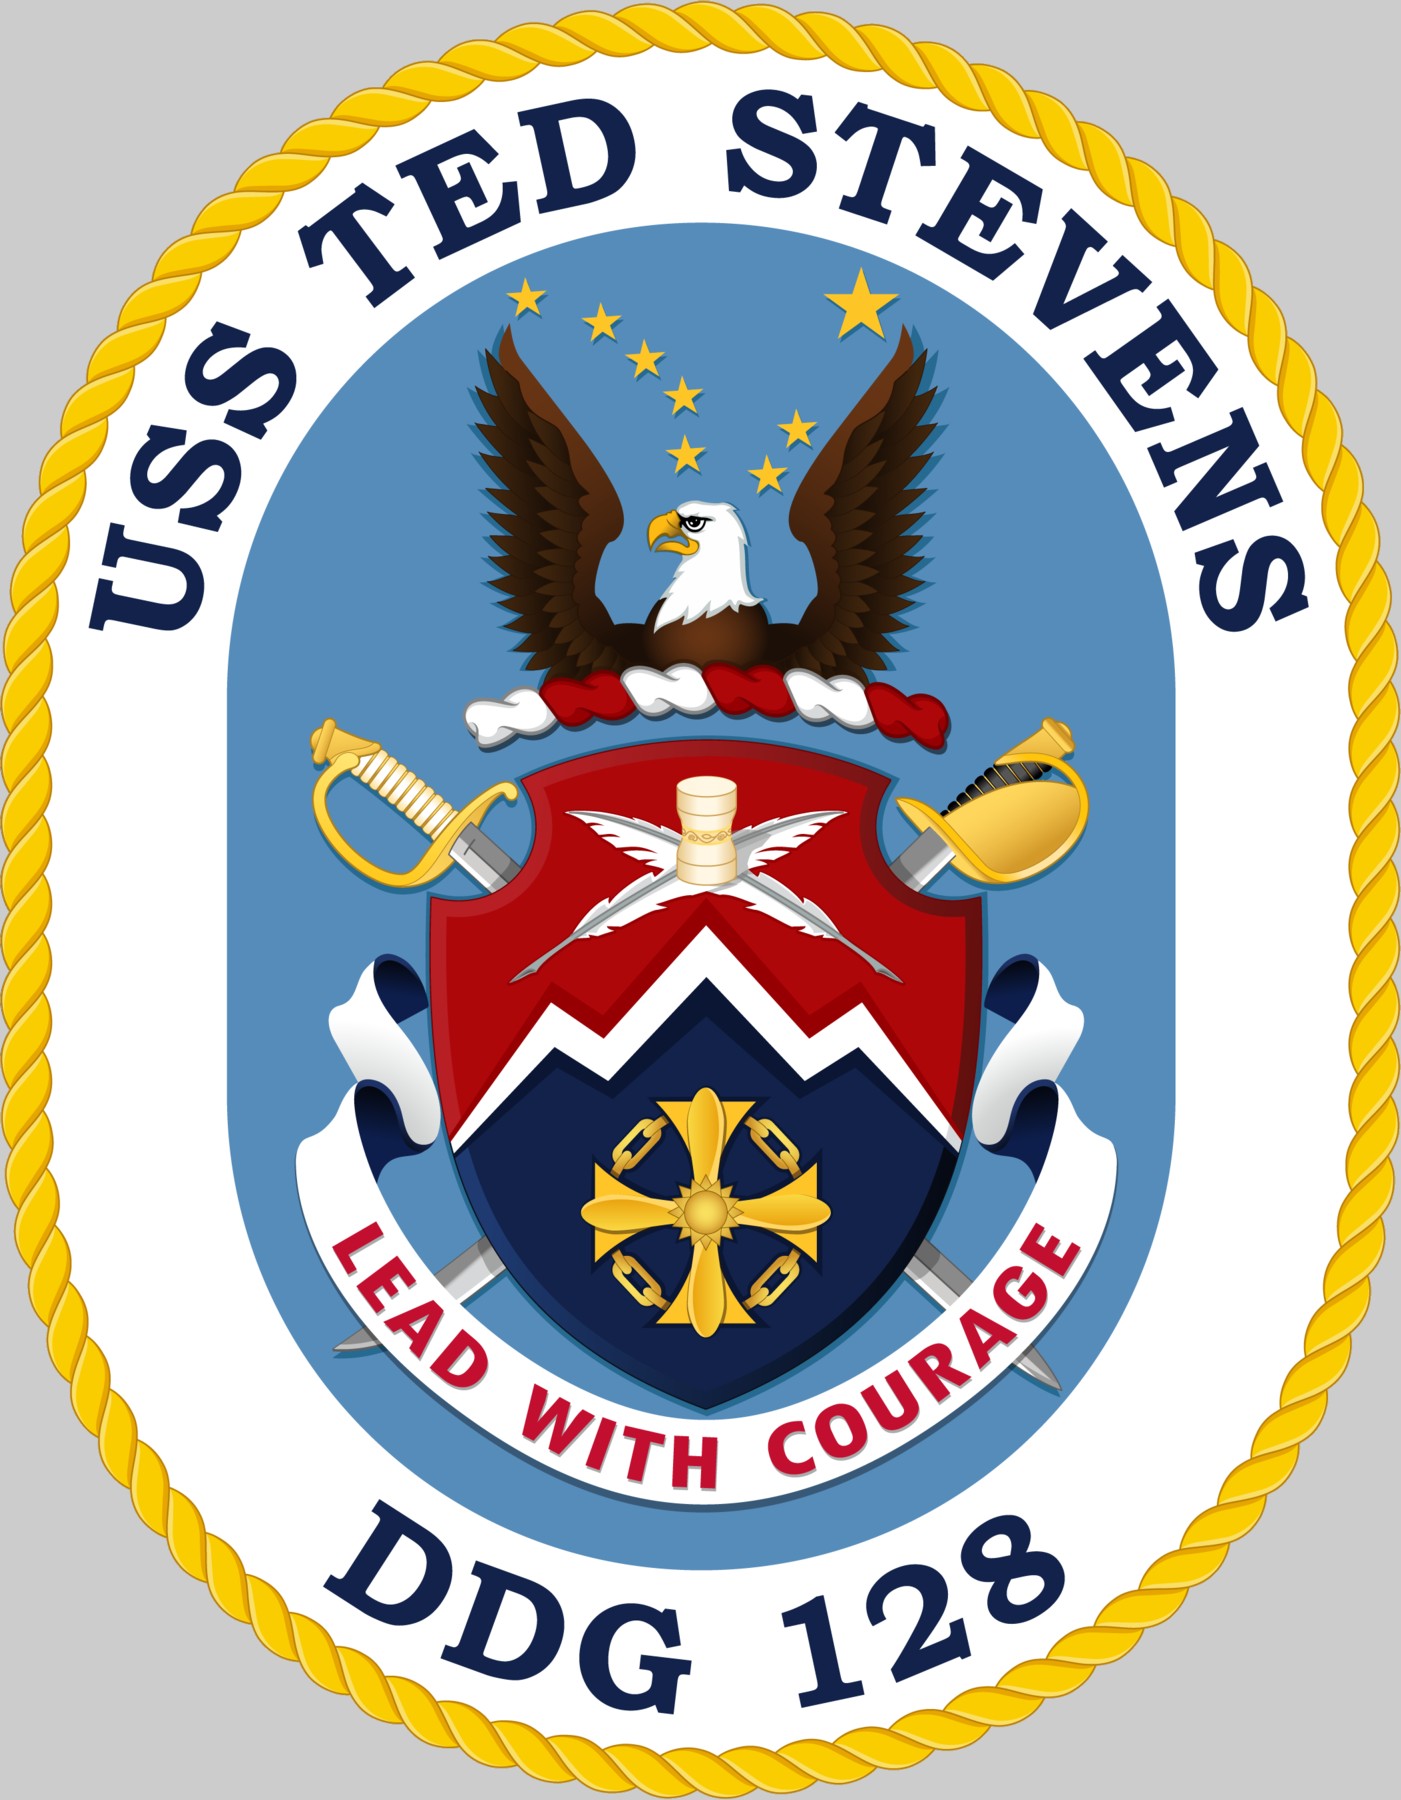 ddg-128 uss ted stevens insignia crest patch badge arleigh burke class guided missile destroyer aegis us navy 02x